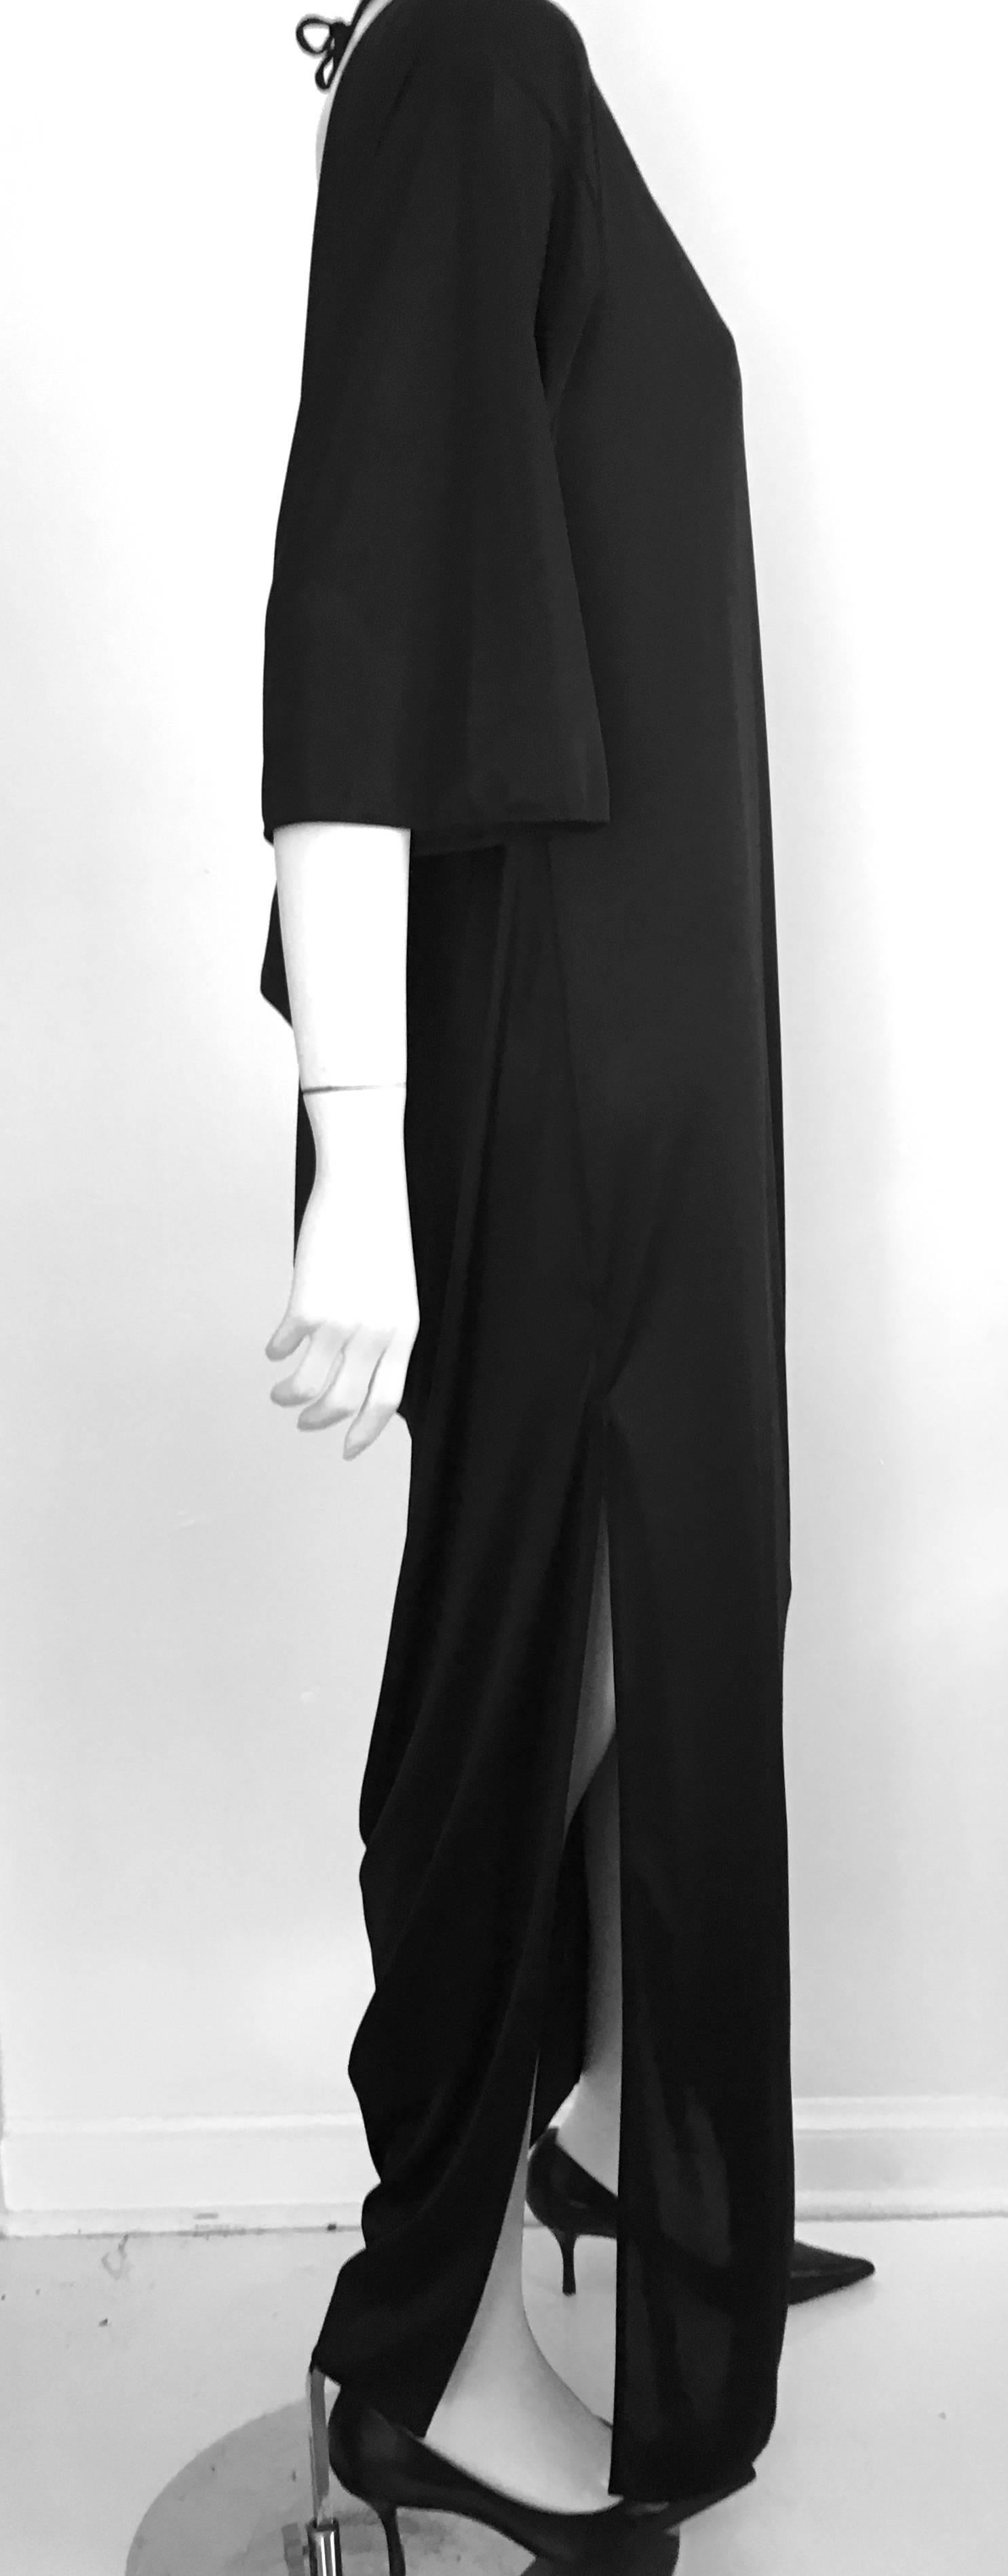 Bill Blass 1970s Flowing Black Gown. In Excellent Condition For Sale In Atlanta, GA